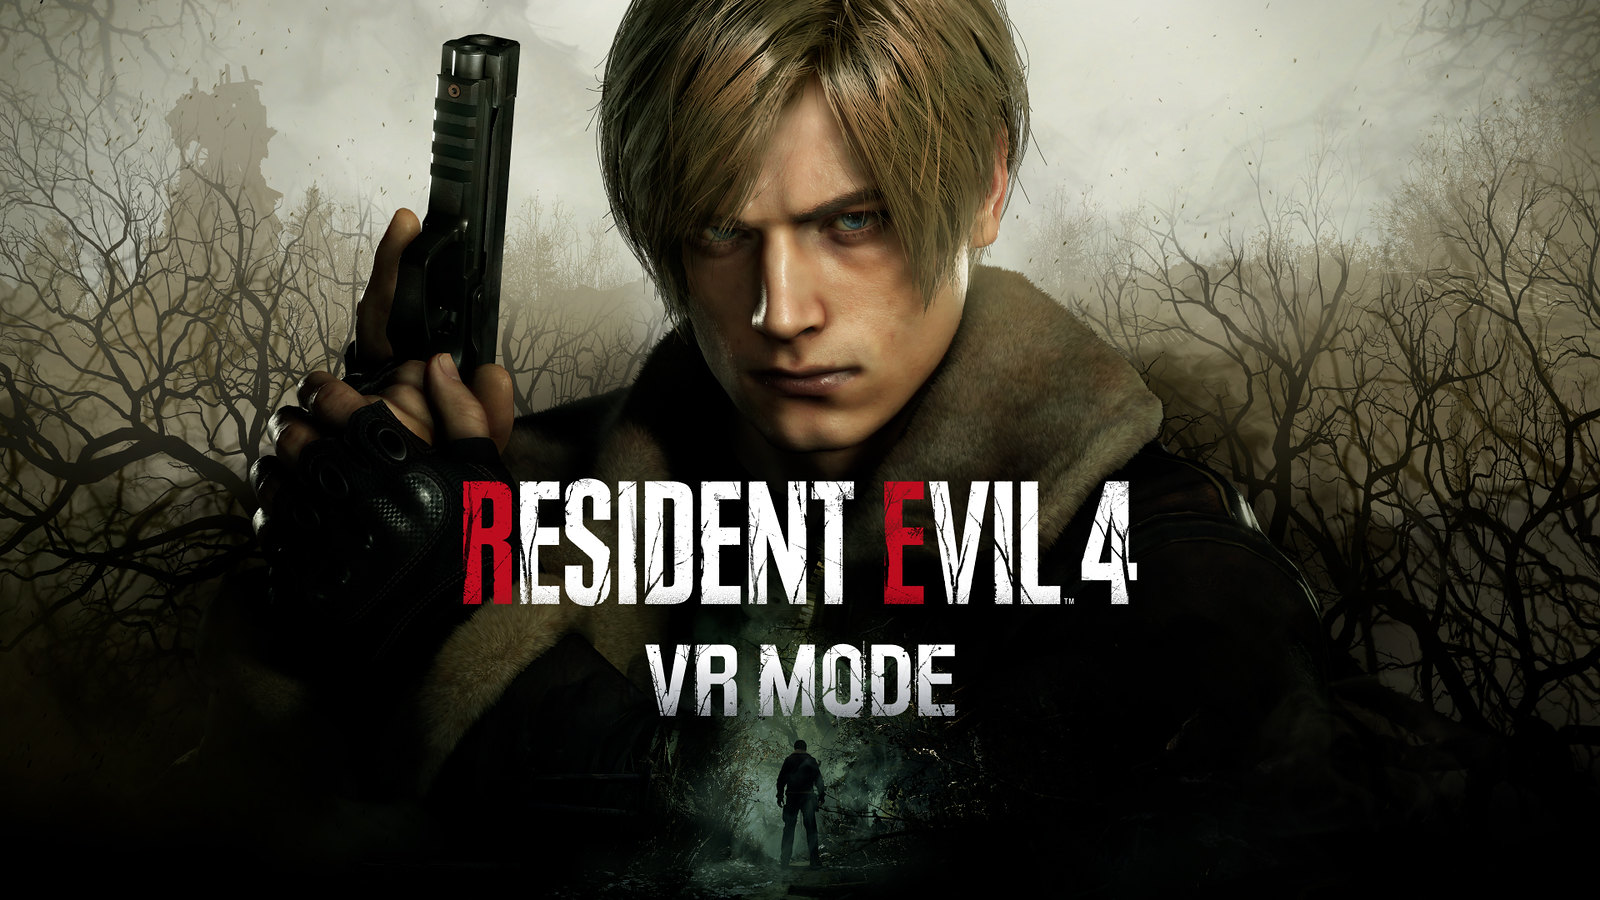 Leon Kennedy is the centerpiece of the image, facing the camera and surrounded by haunting woodland. The on-screen text reads: Resident Evil 4 VR Mode